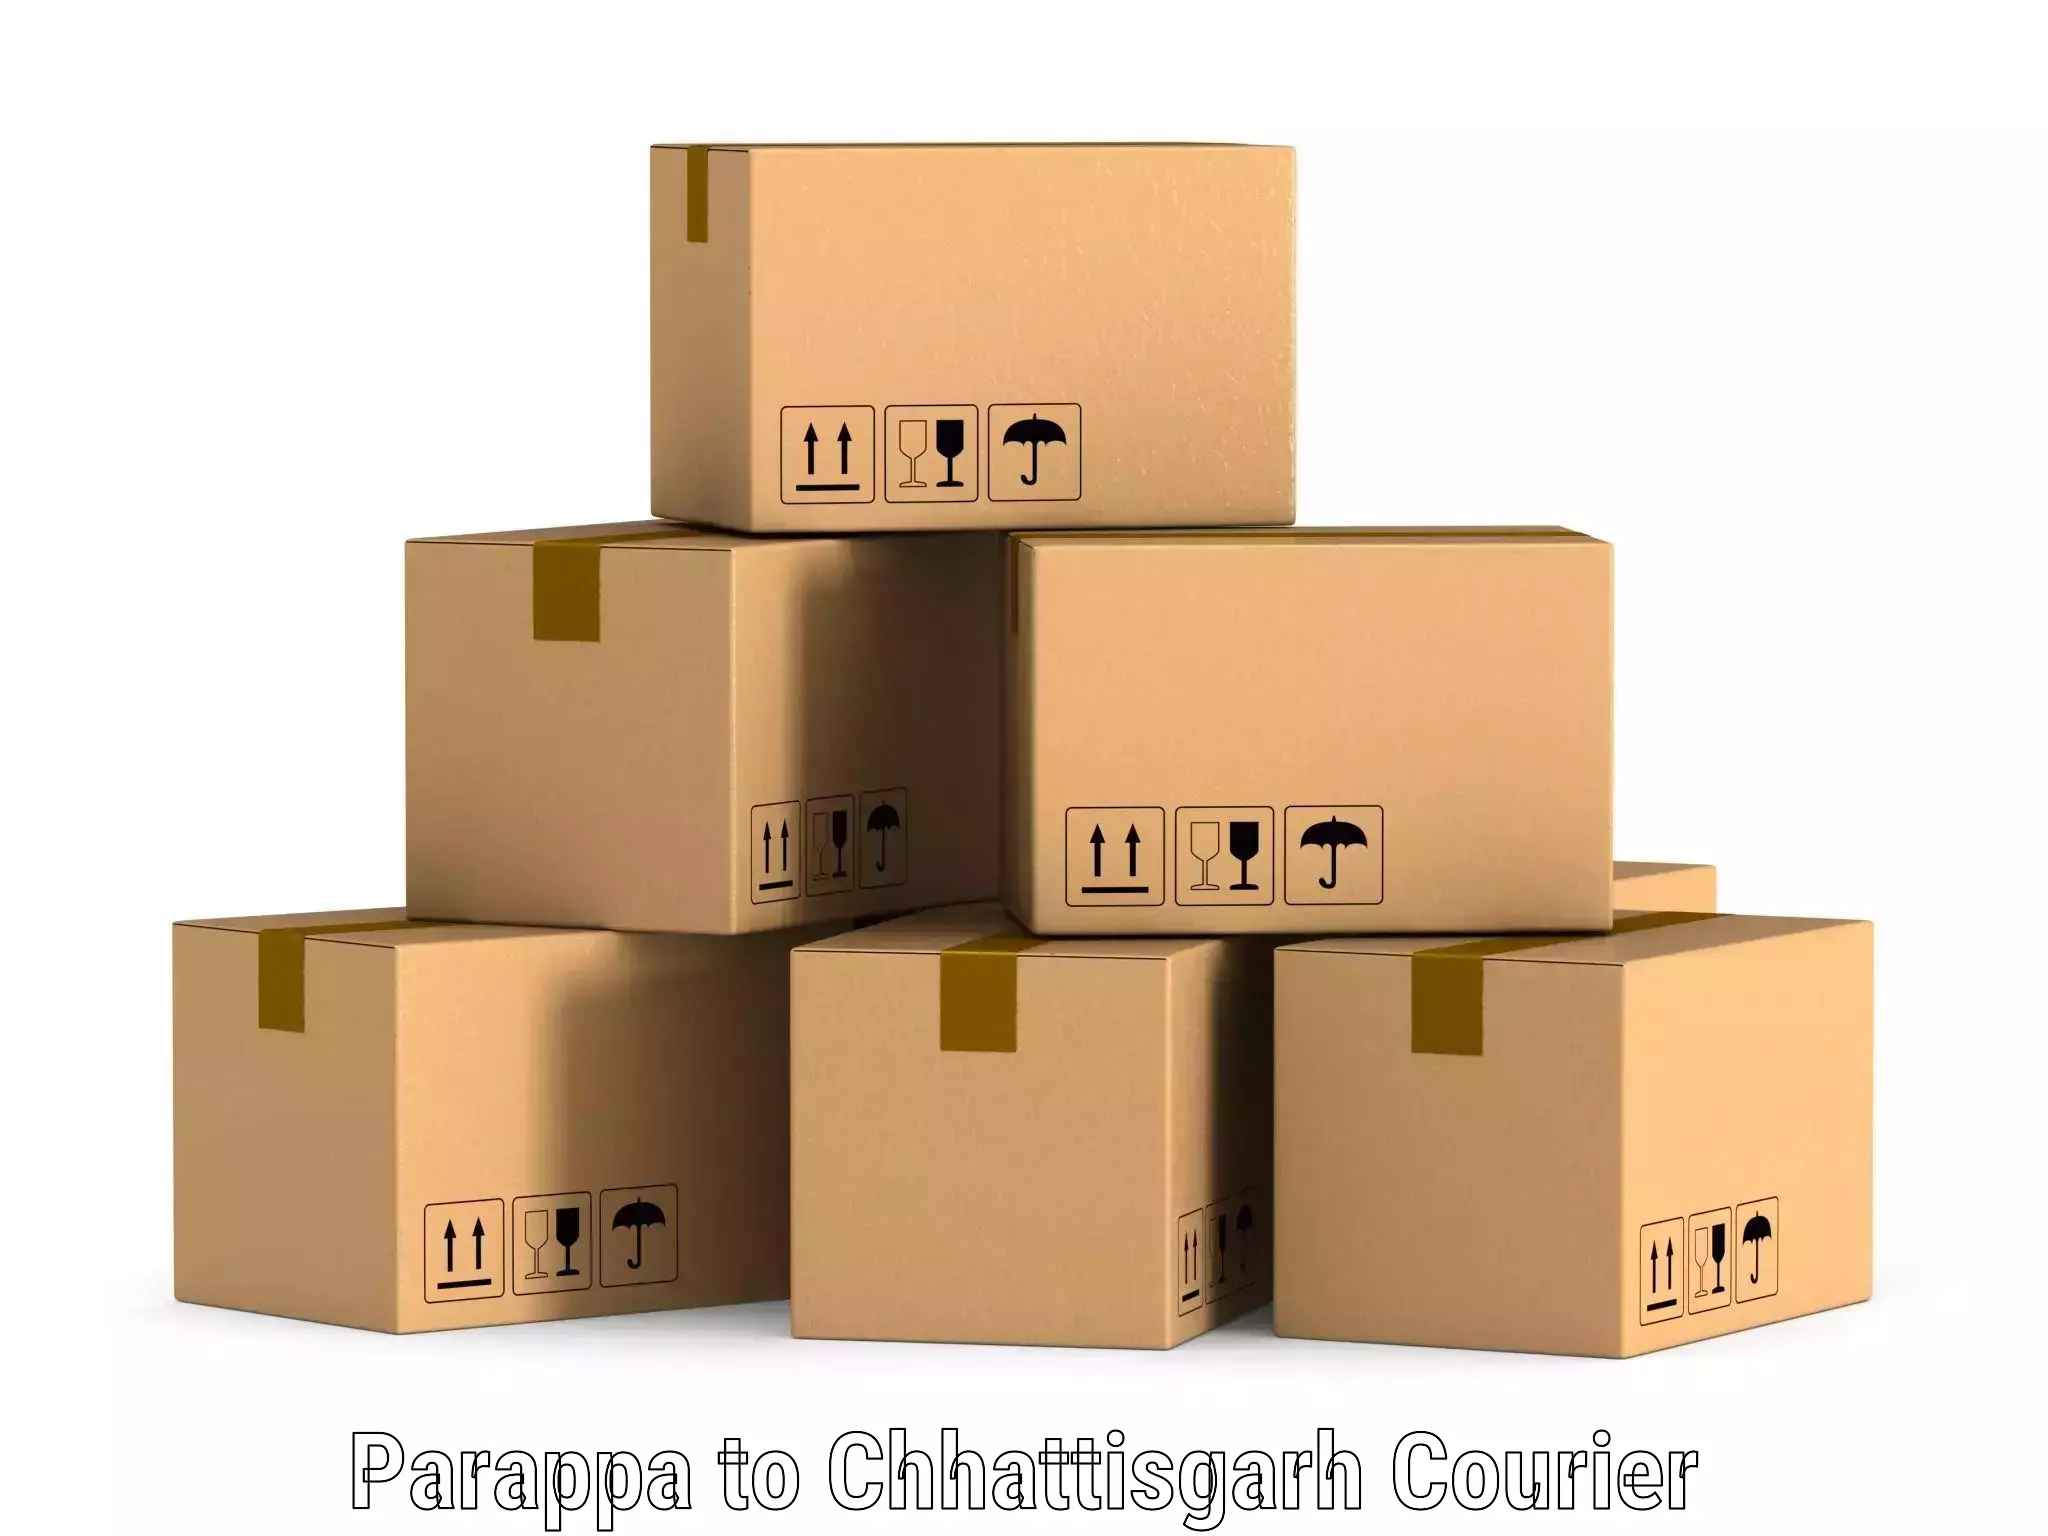 Global delivery options Parappa to Patna Chhattisgarh